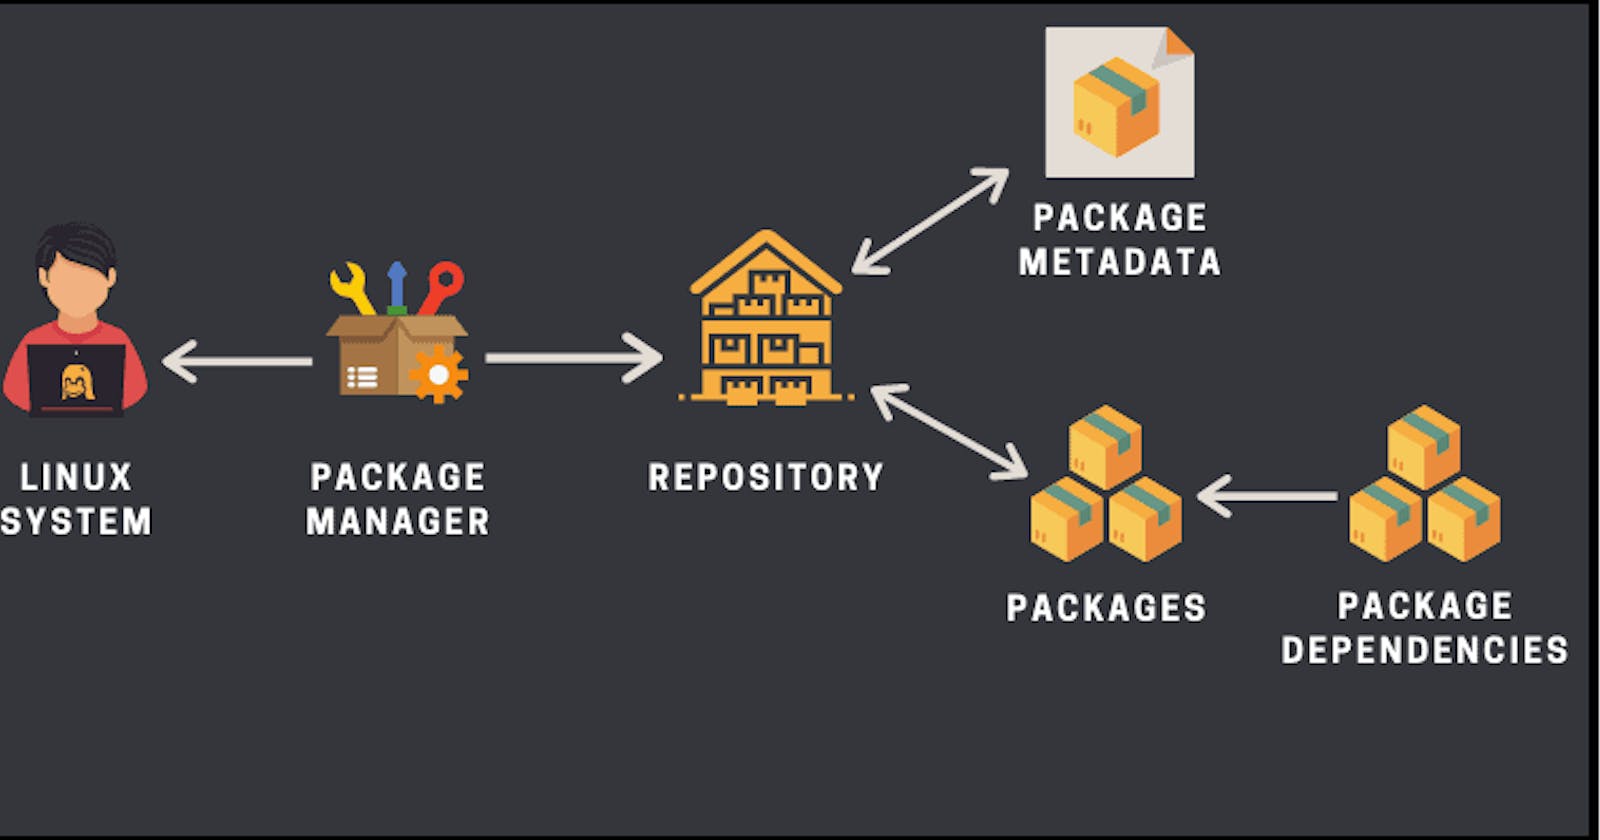 Understanding package manager and systemctl